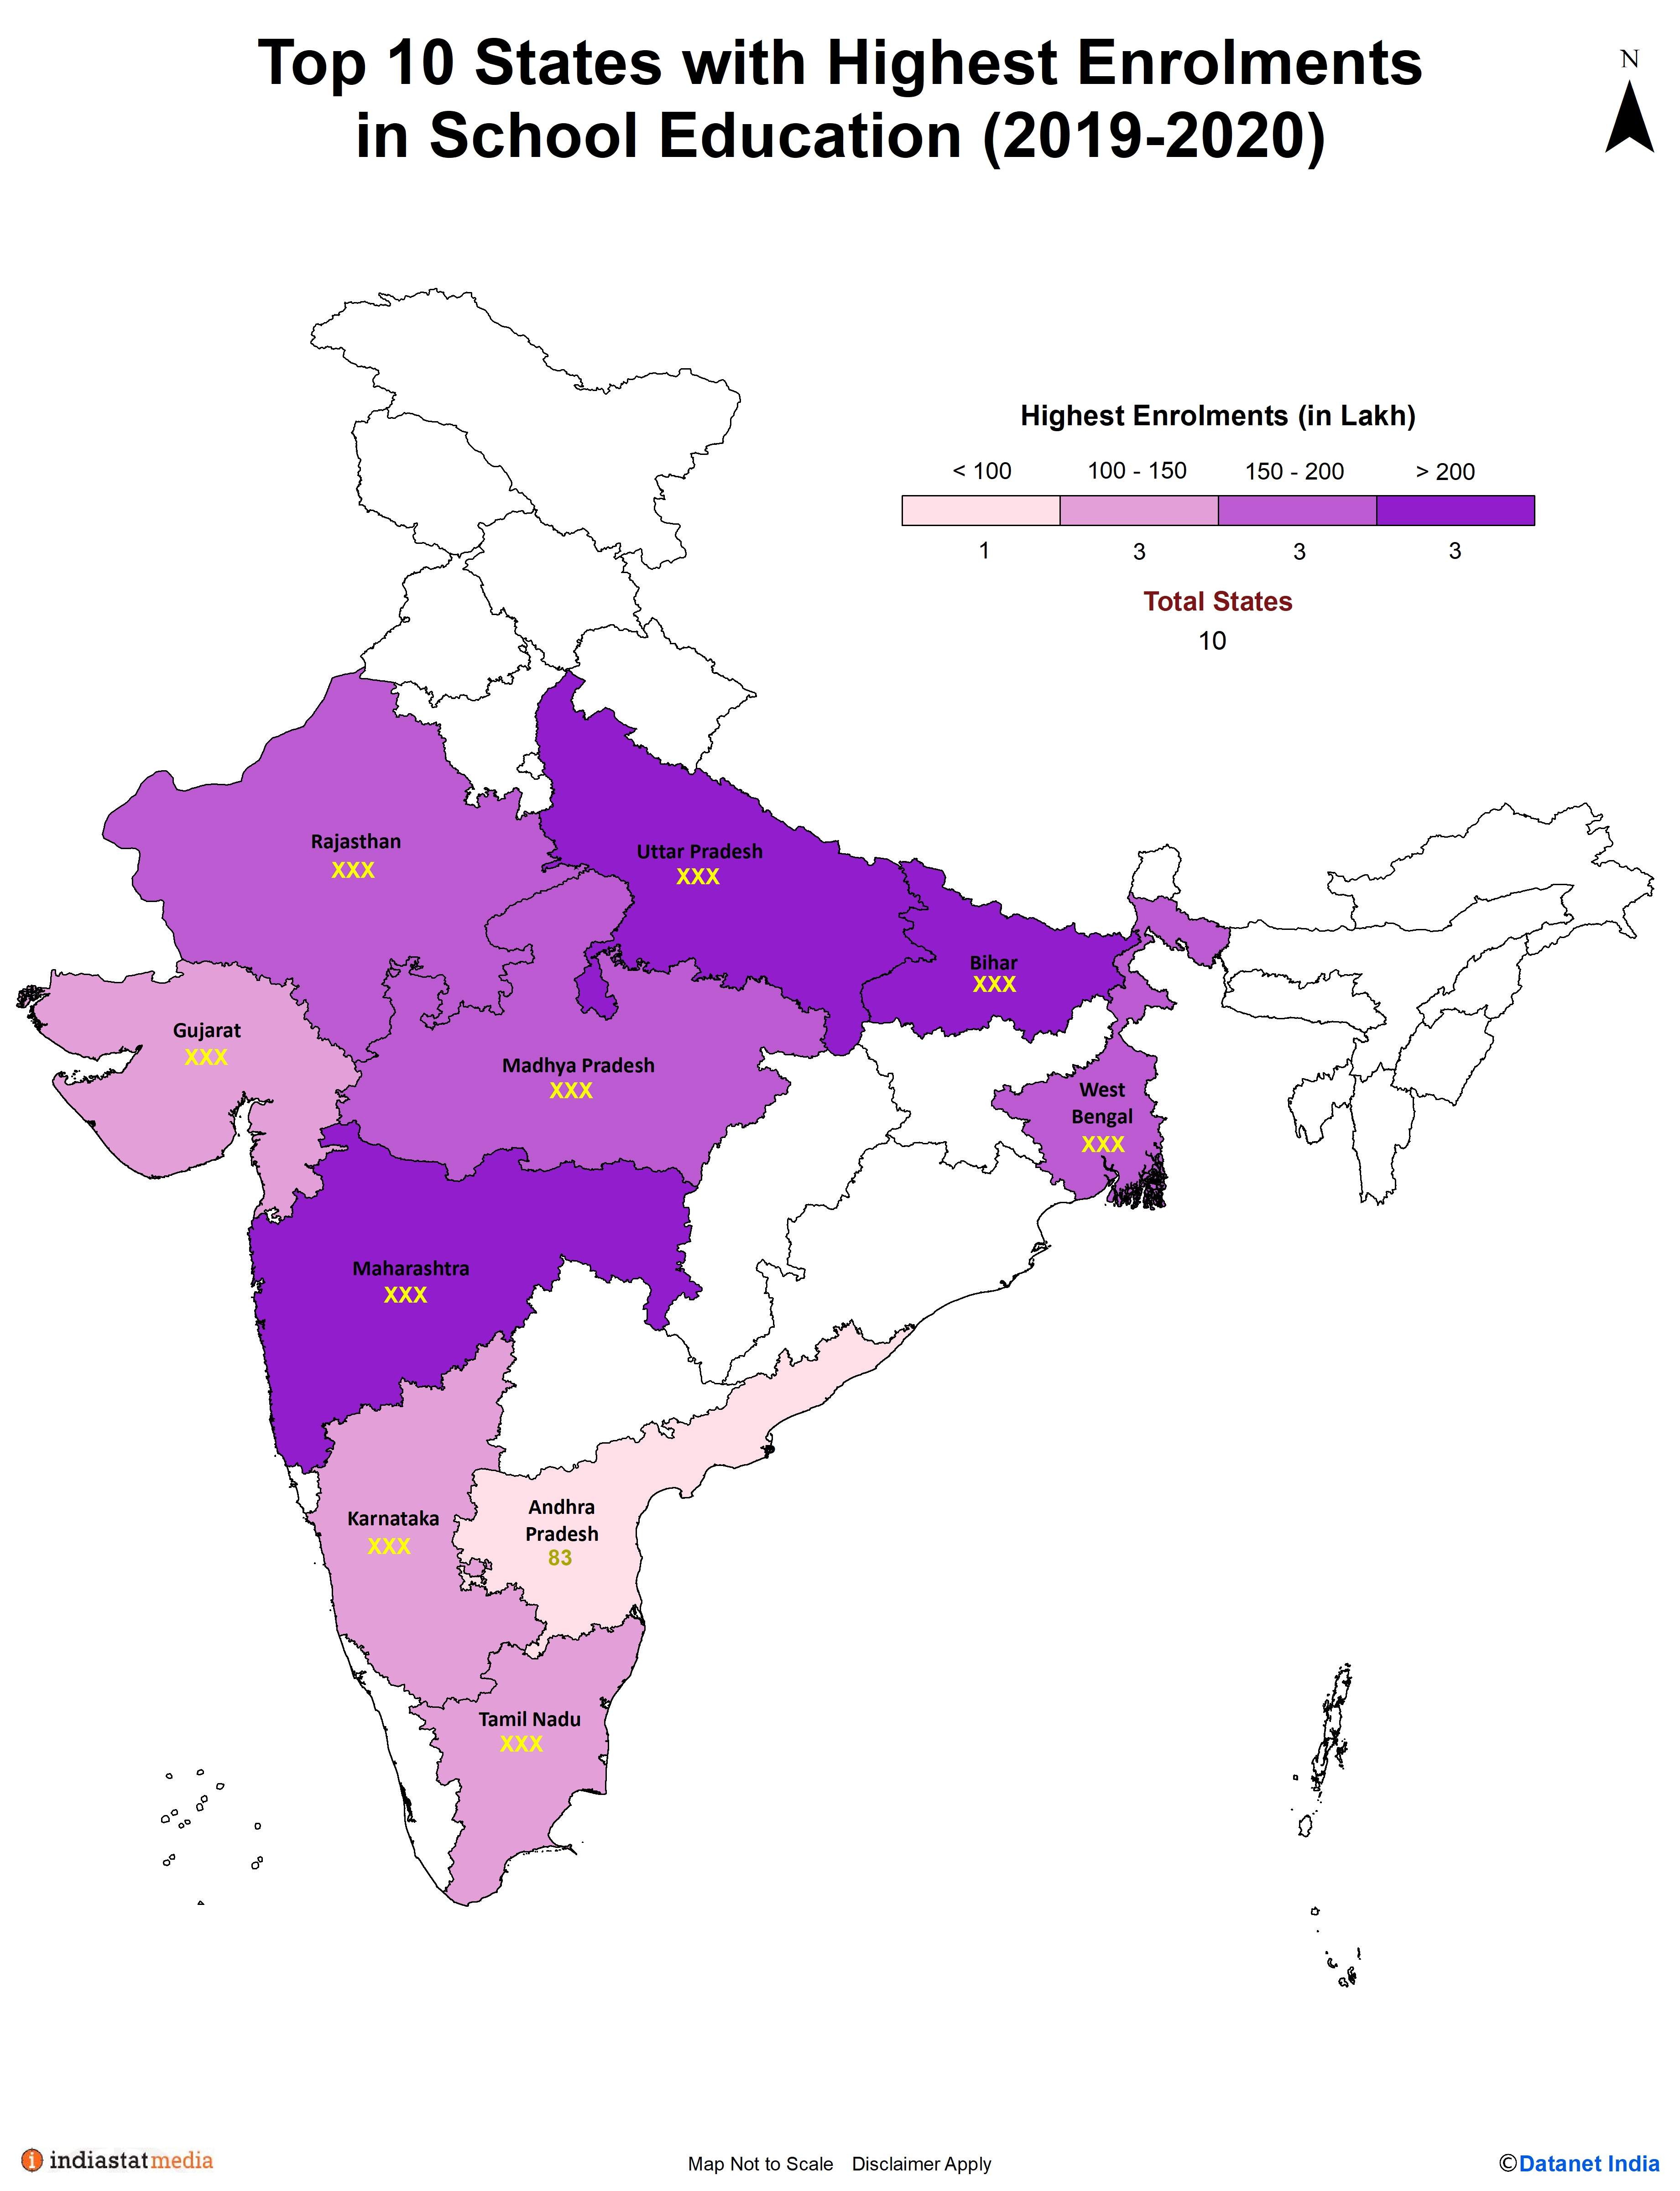 Top 10 States with Highest Enrolments in School Education in India (2019-2020)